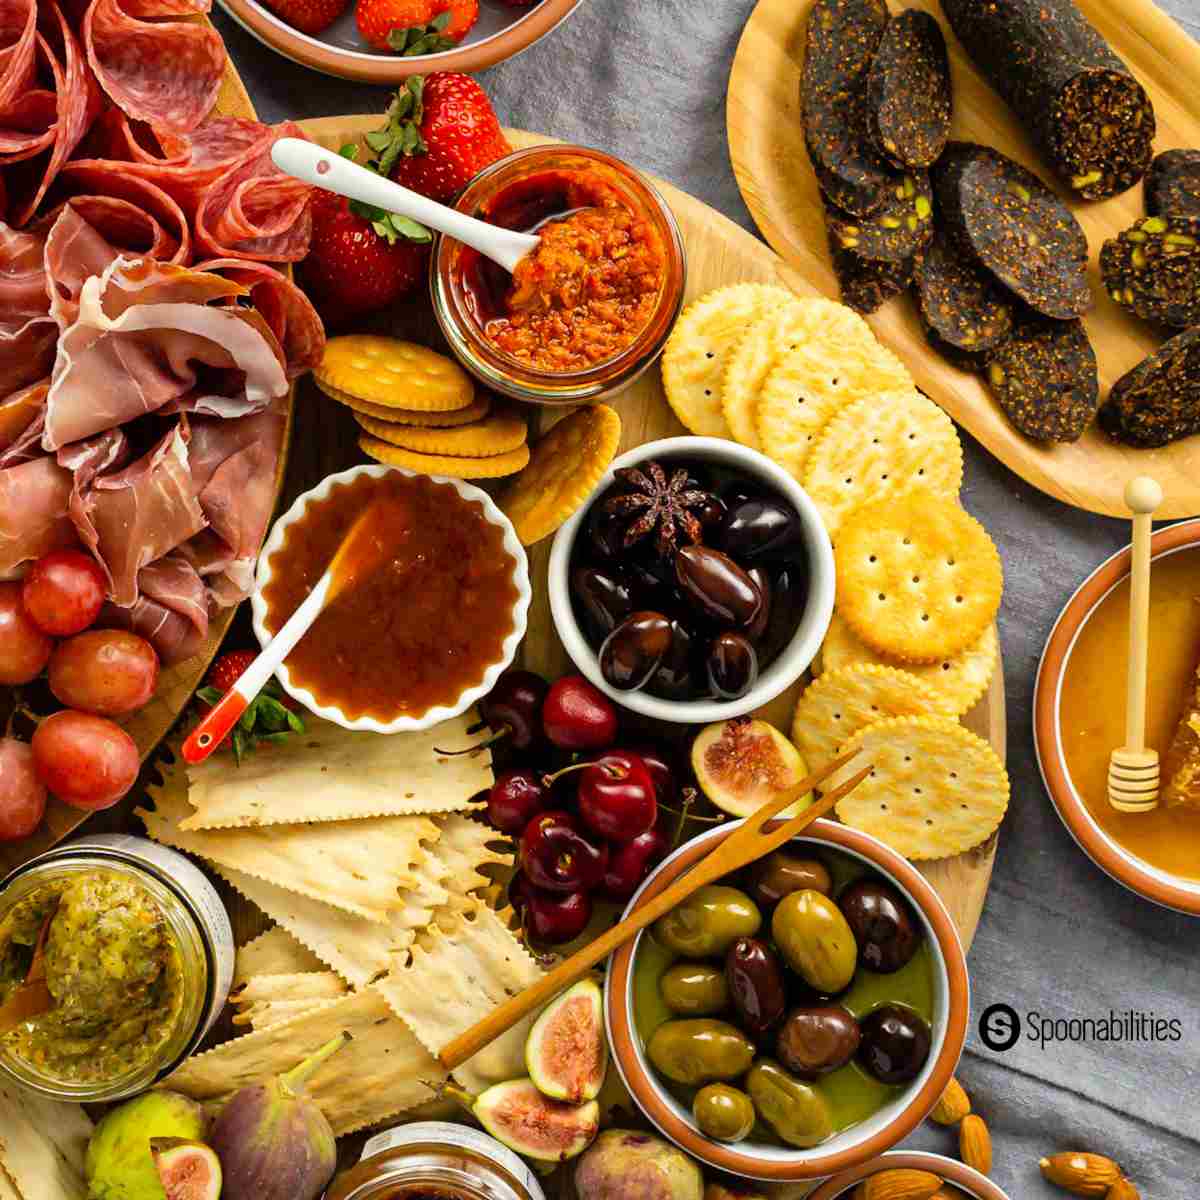 Charcuterie board with meats and spreads, with crackers and fresh and dried fruits